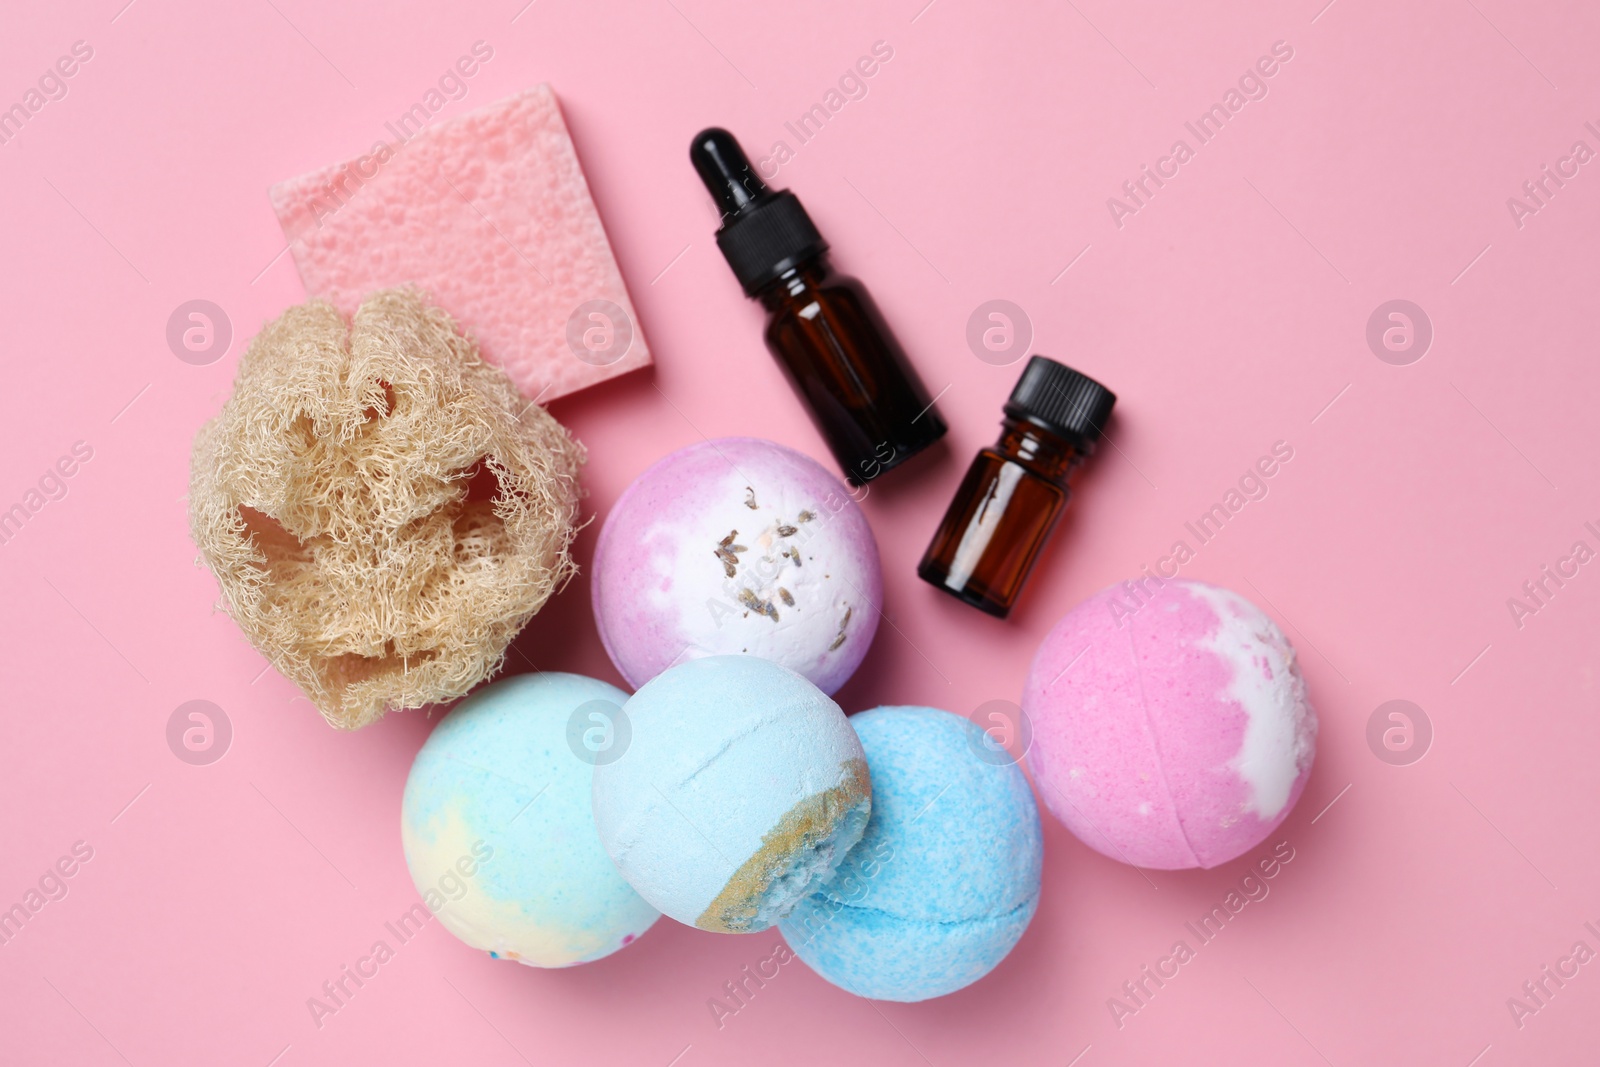 Photo of Bath bombs, loofah sponge, soap bar and bottles on pink background, flat lay